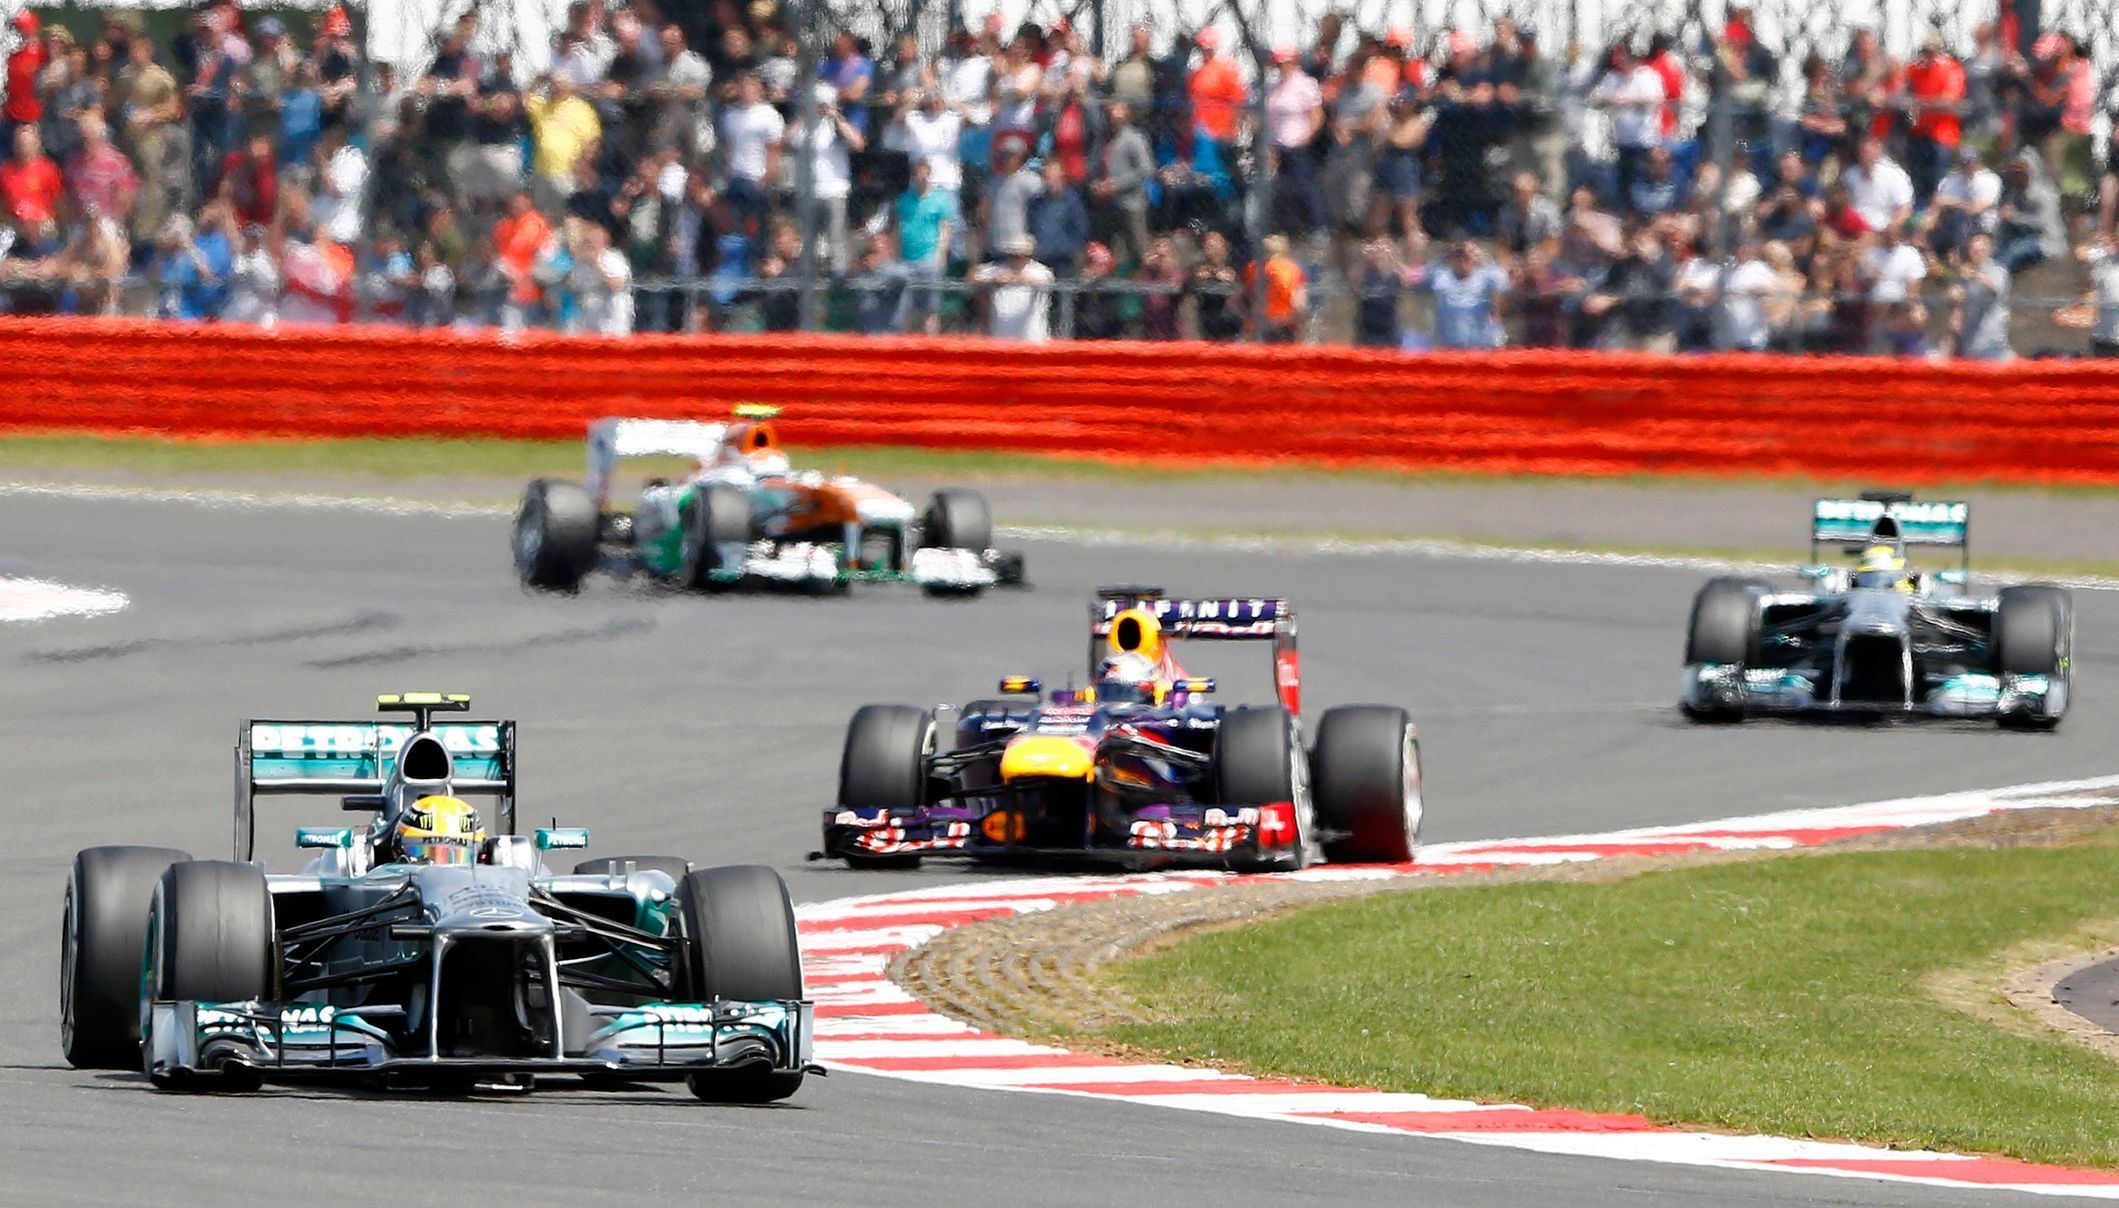 Mercedes Formula One driver Hamilton of Britain leads on the